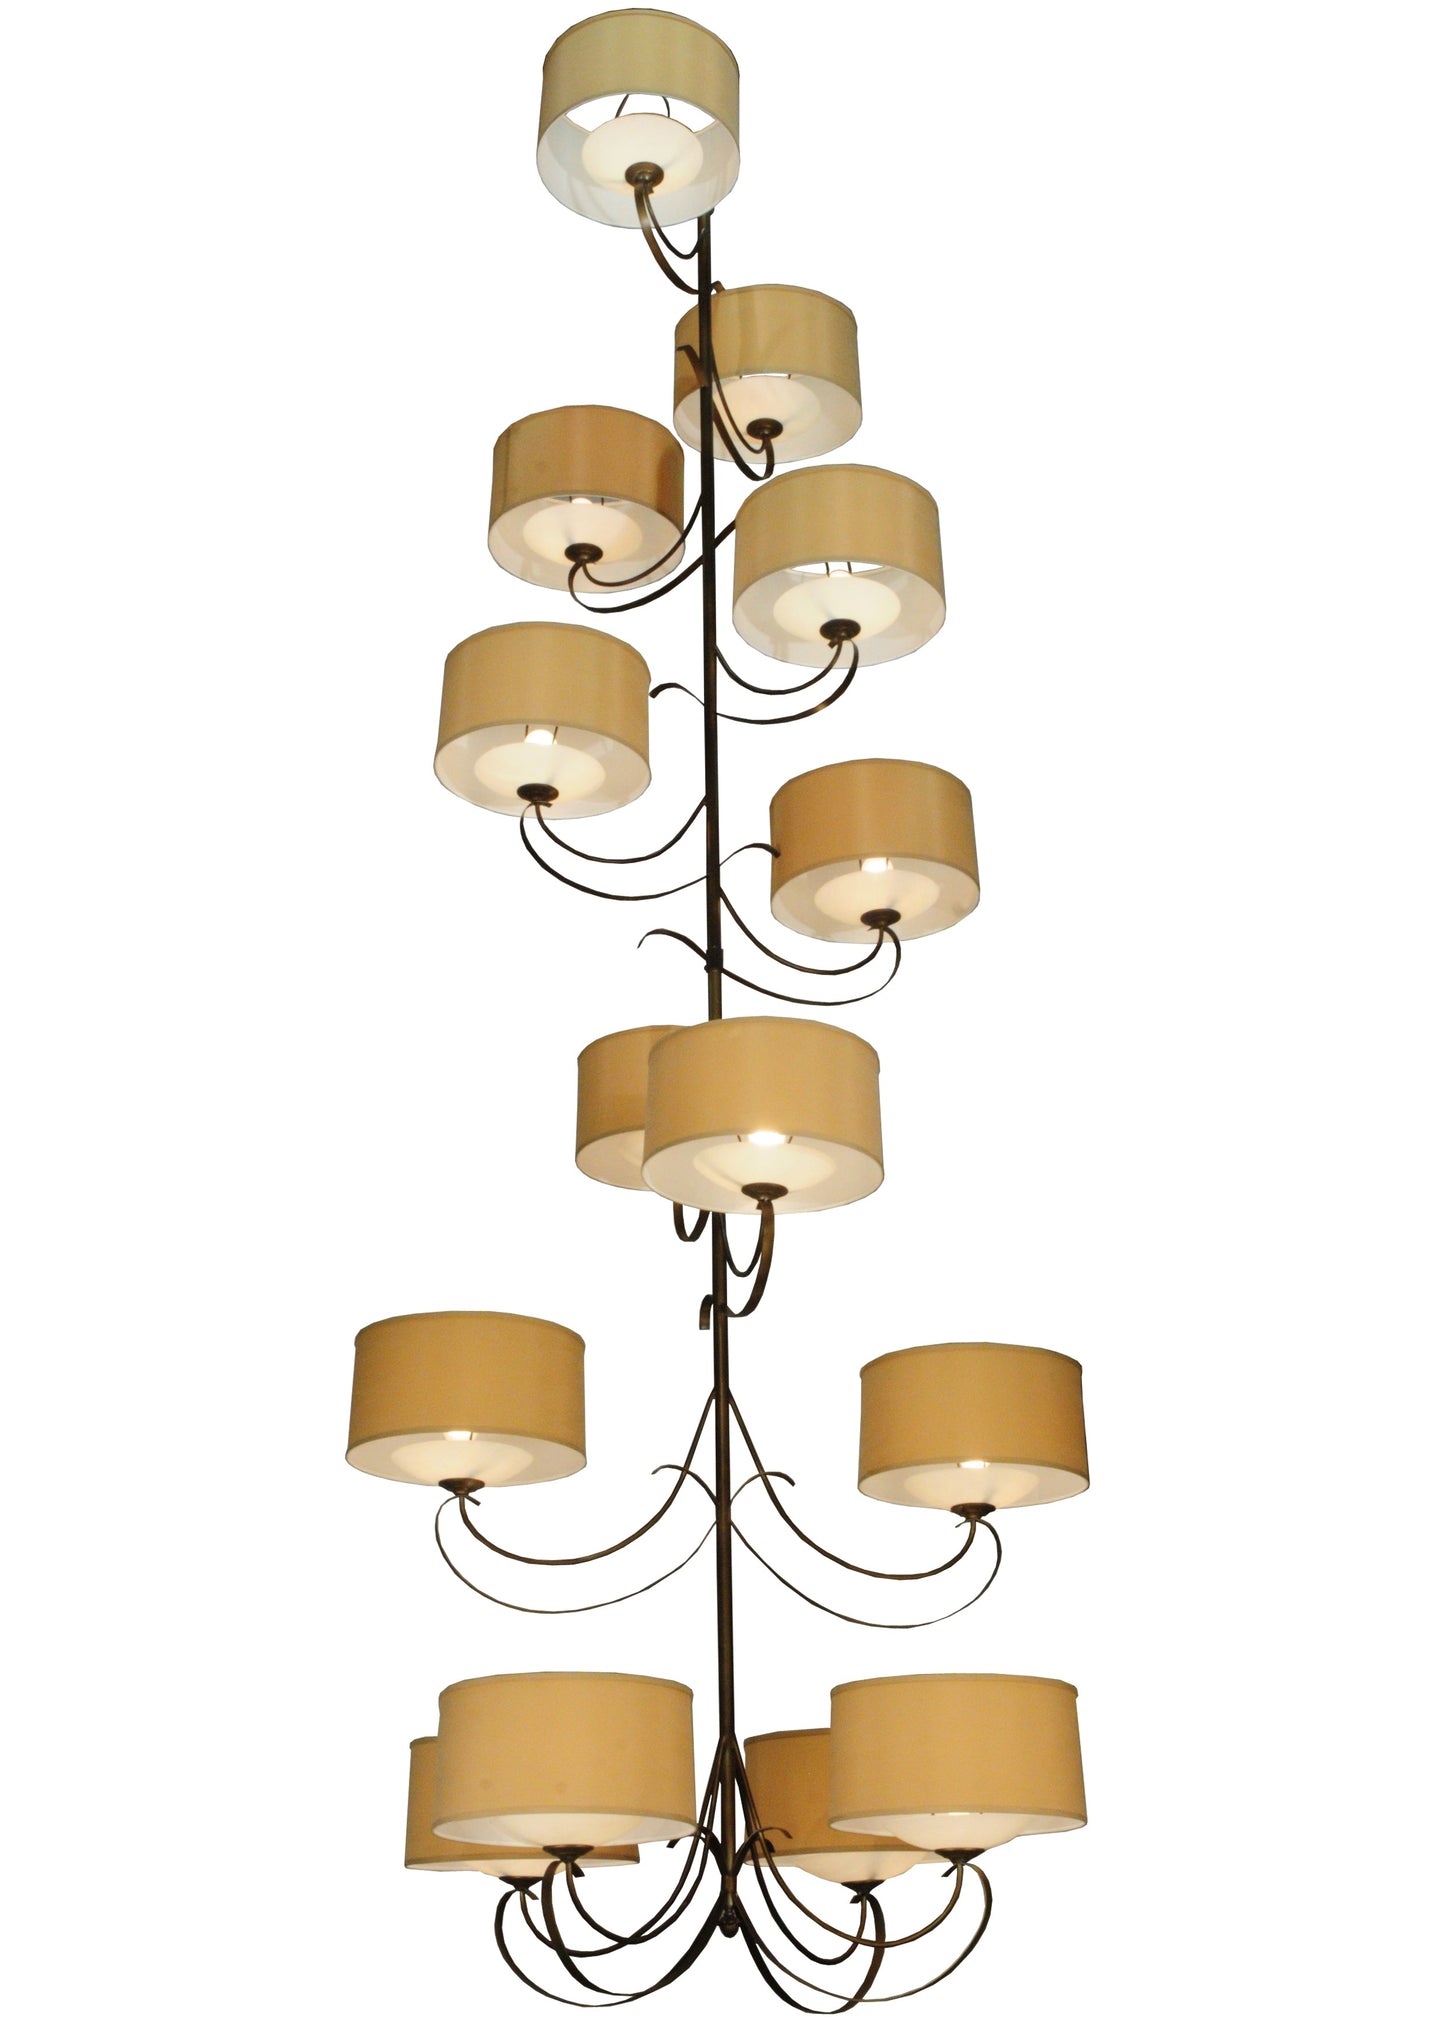 60" Sequoia 14 Arm Chandelier by 2nd Ave Lighting